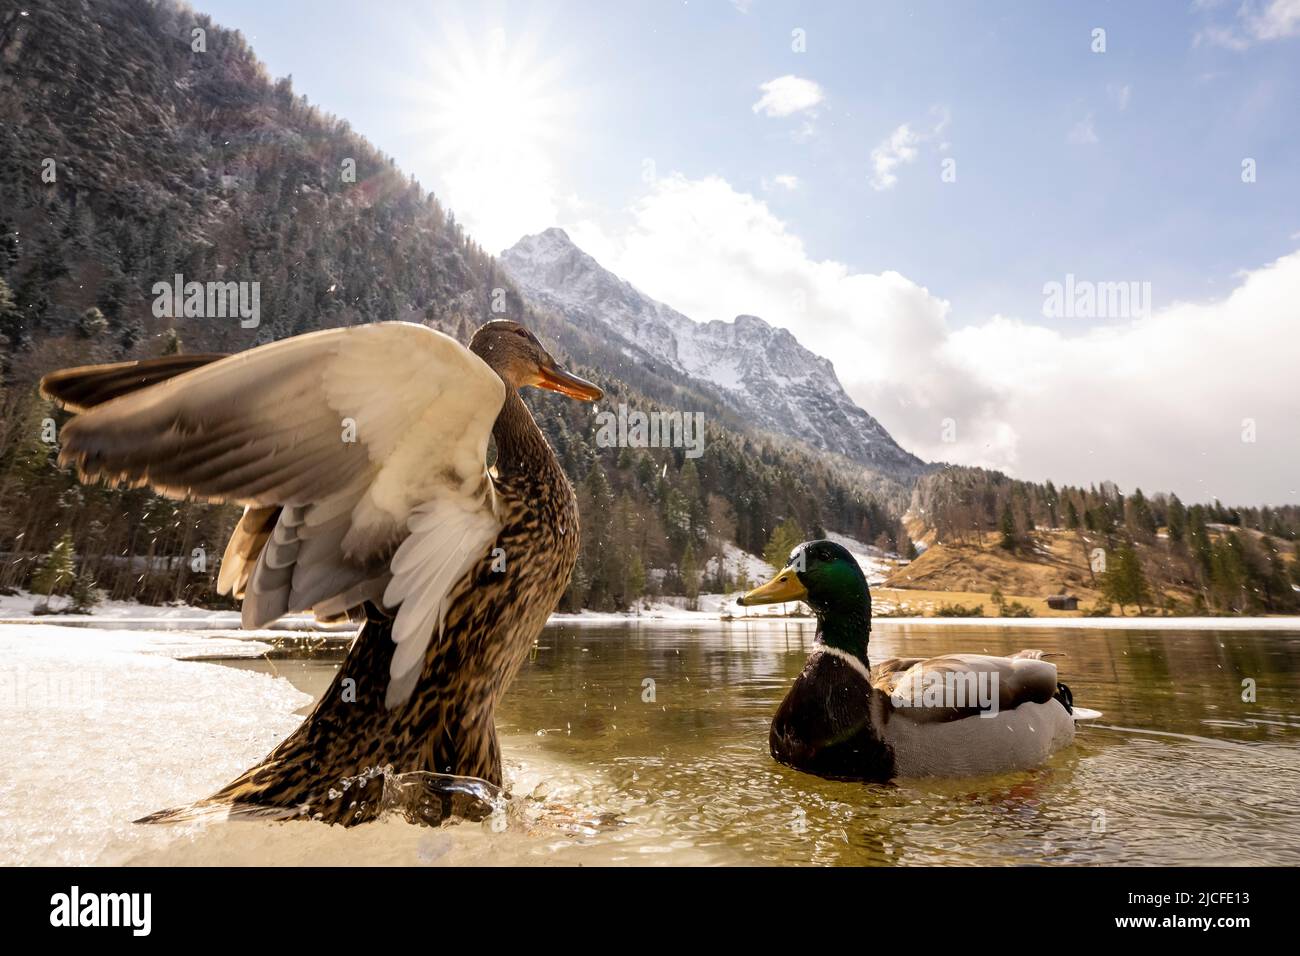 A pair of mallards on the shore of the spring-like Ferchensee in the Bavarian Alps. In the background the Wetterstein and the sun with snow at higher altitudes, in the foreground the two ducks, the female stretches her wings in front of the drake. Stock Photo